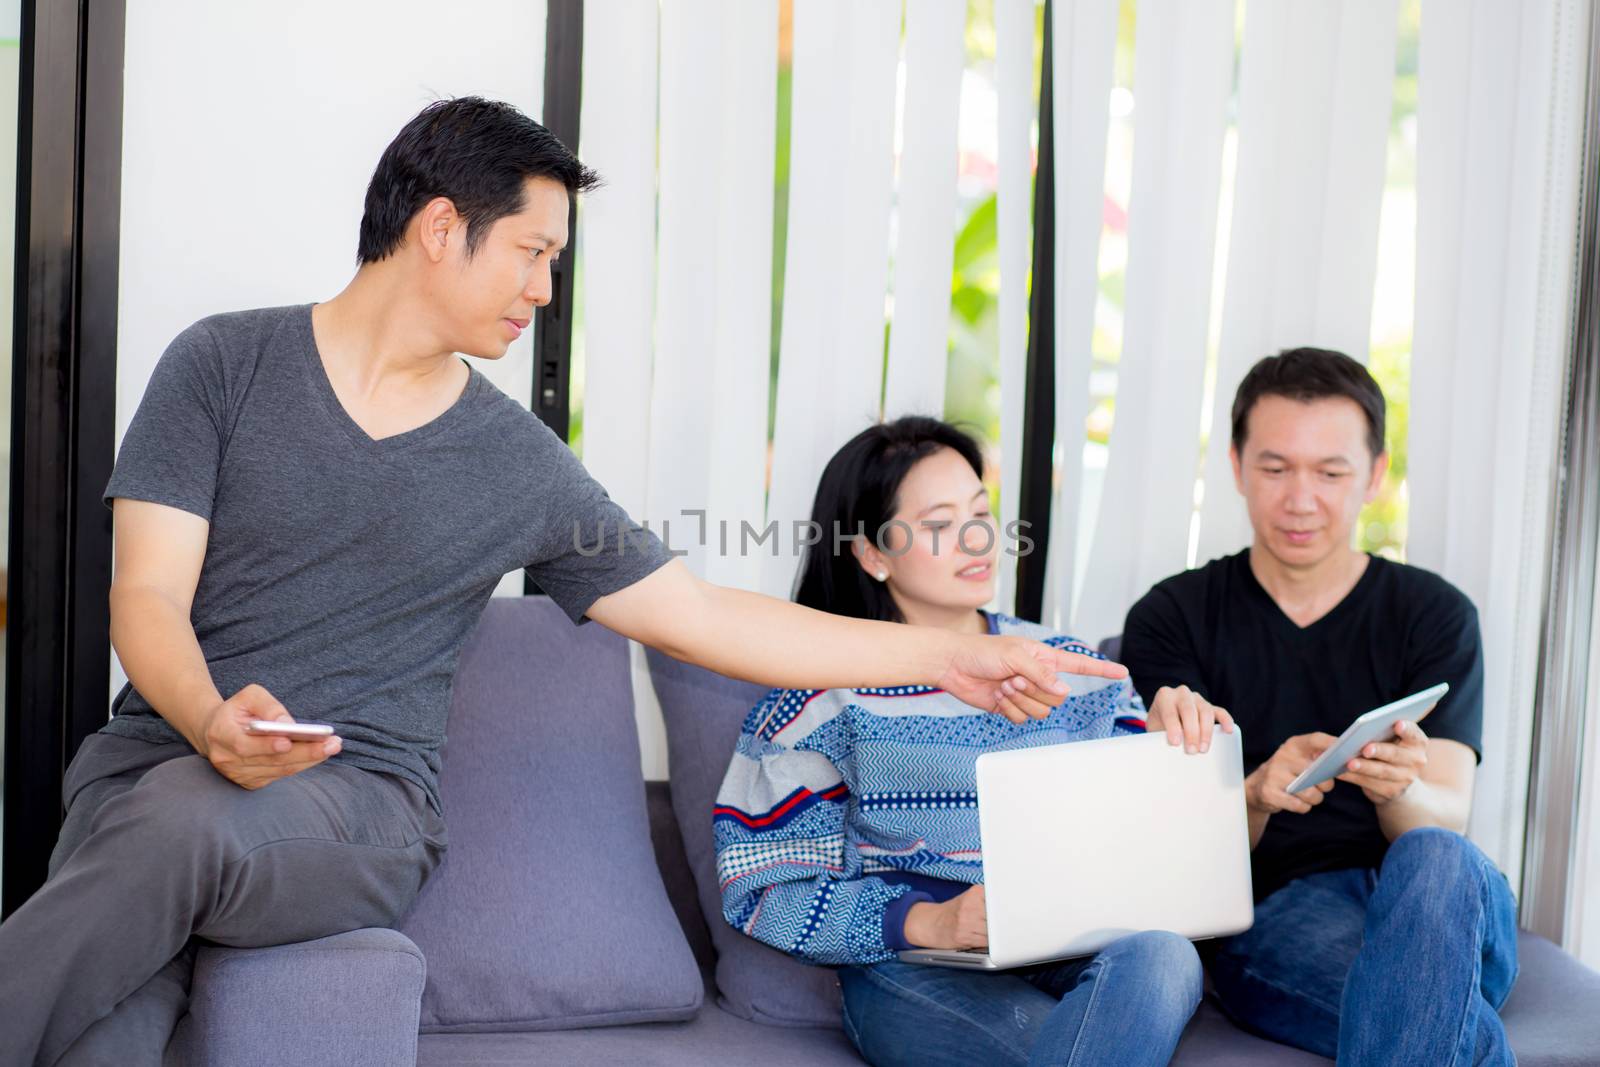 Three friends on line with multiple devices and talking sitting on a sofa in the living room in a house interior.